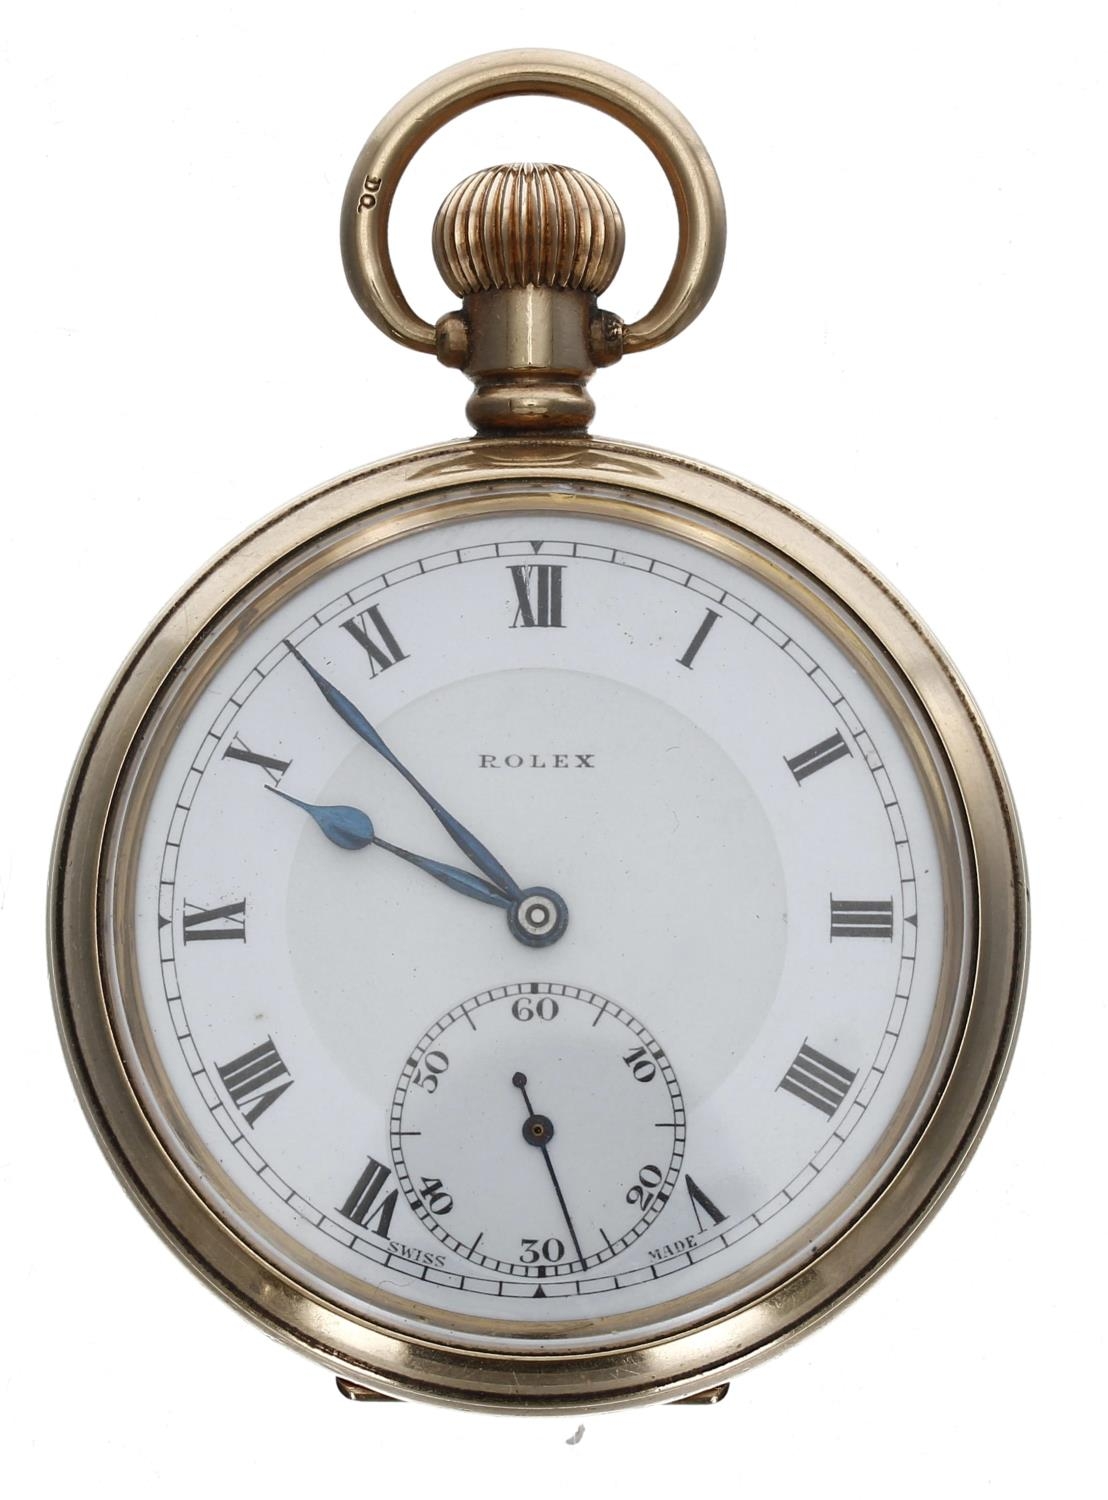 Rolex - Swiss gold plated lever pocket watch, signed 17 jewel three adj. movement, signed dial - Image 2 of 4